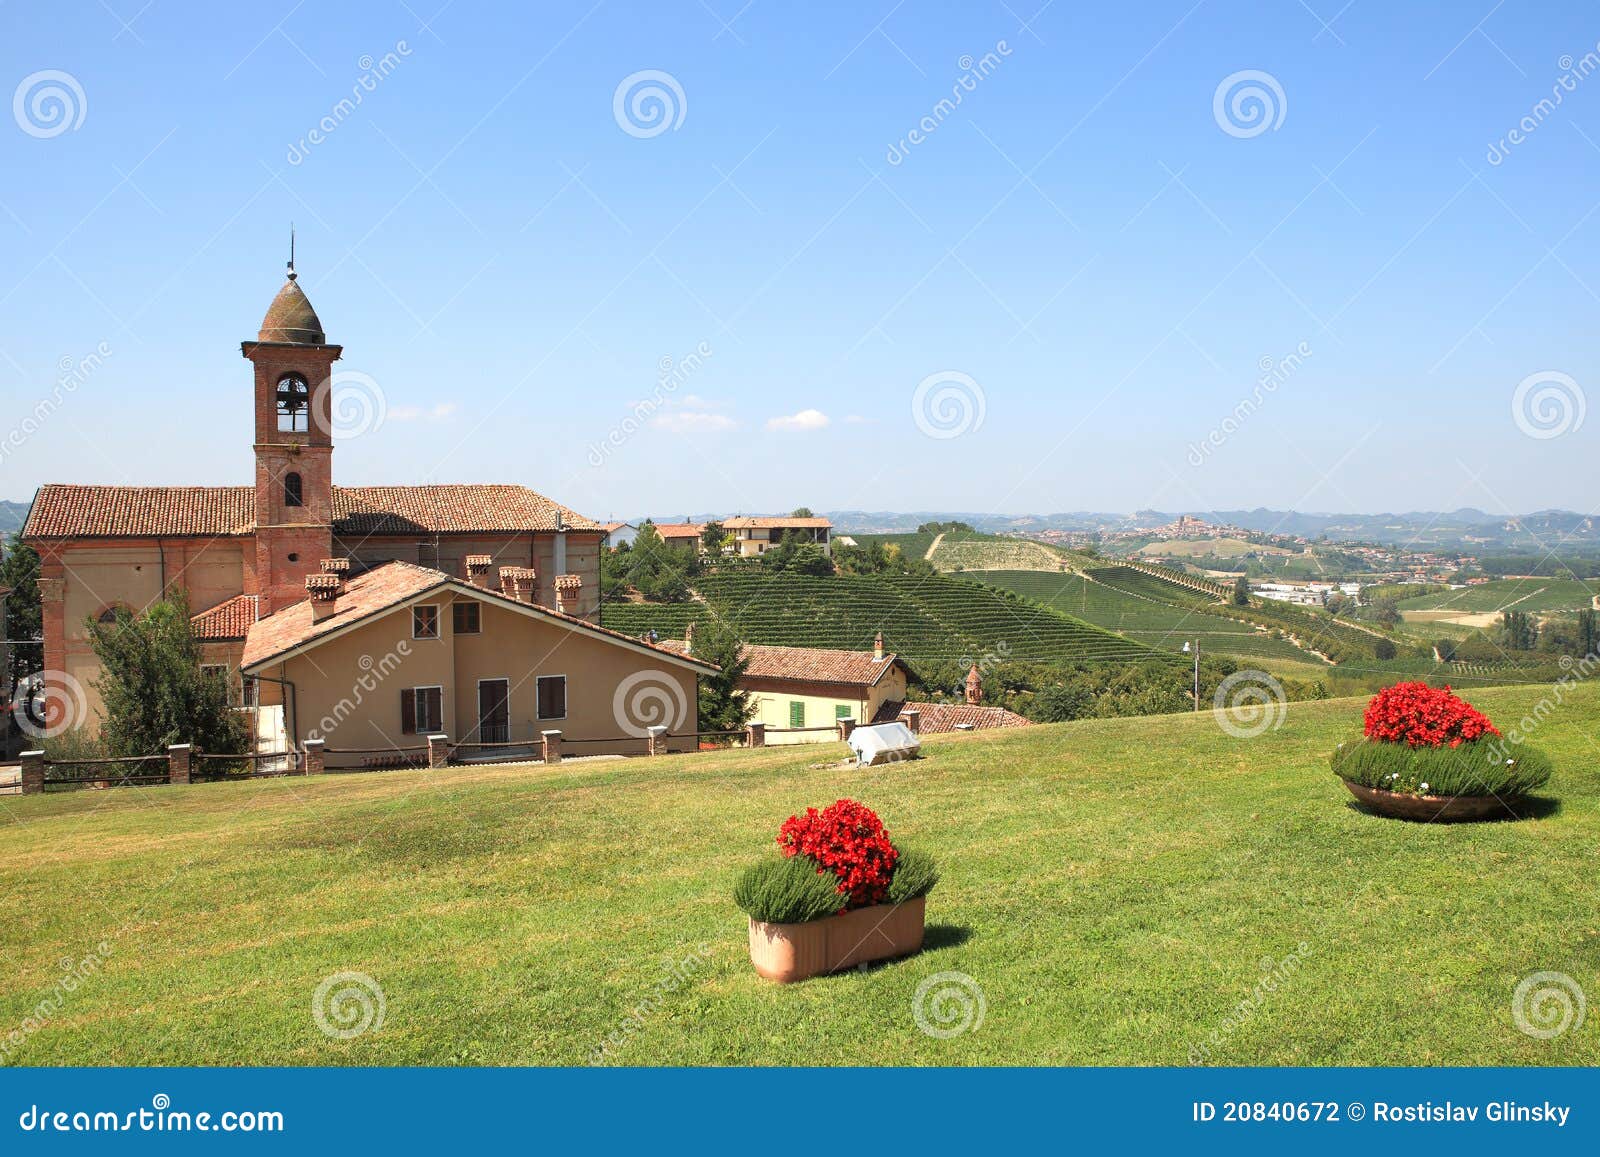 small town of grinzane cavour, italy.